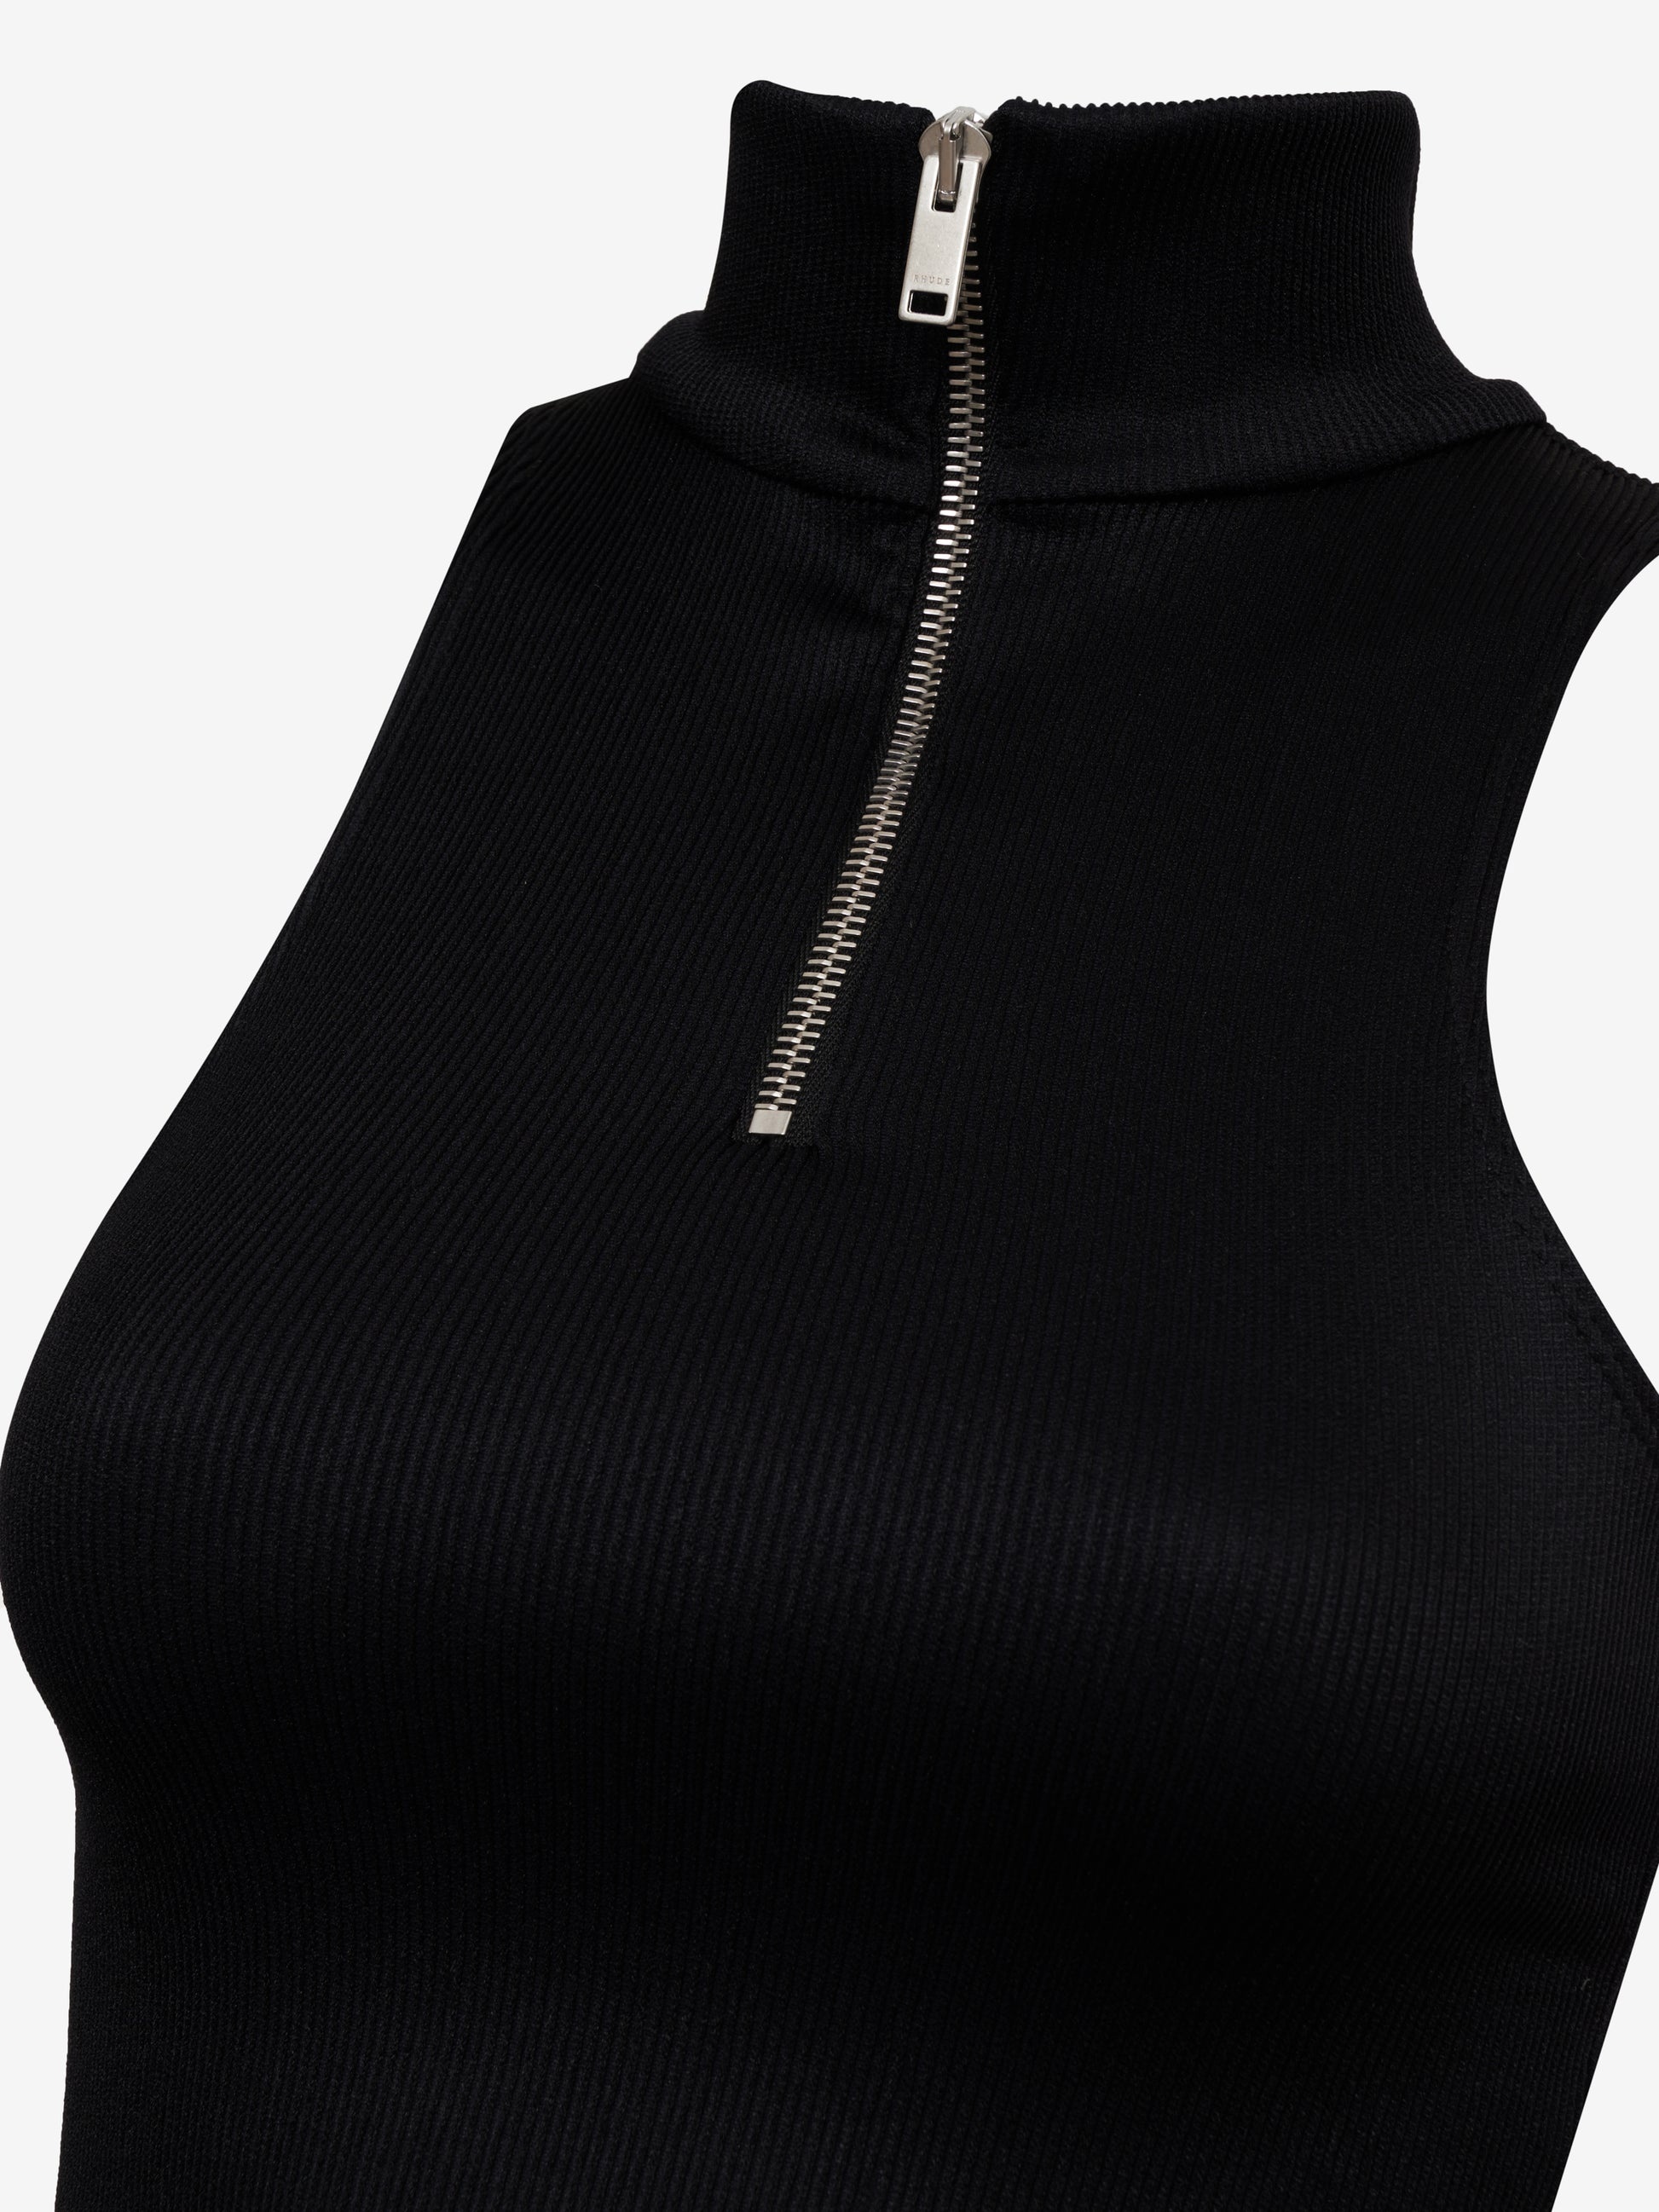 RIBBED KNIT TURTLE NECK ZIP TOP - 2